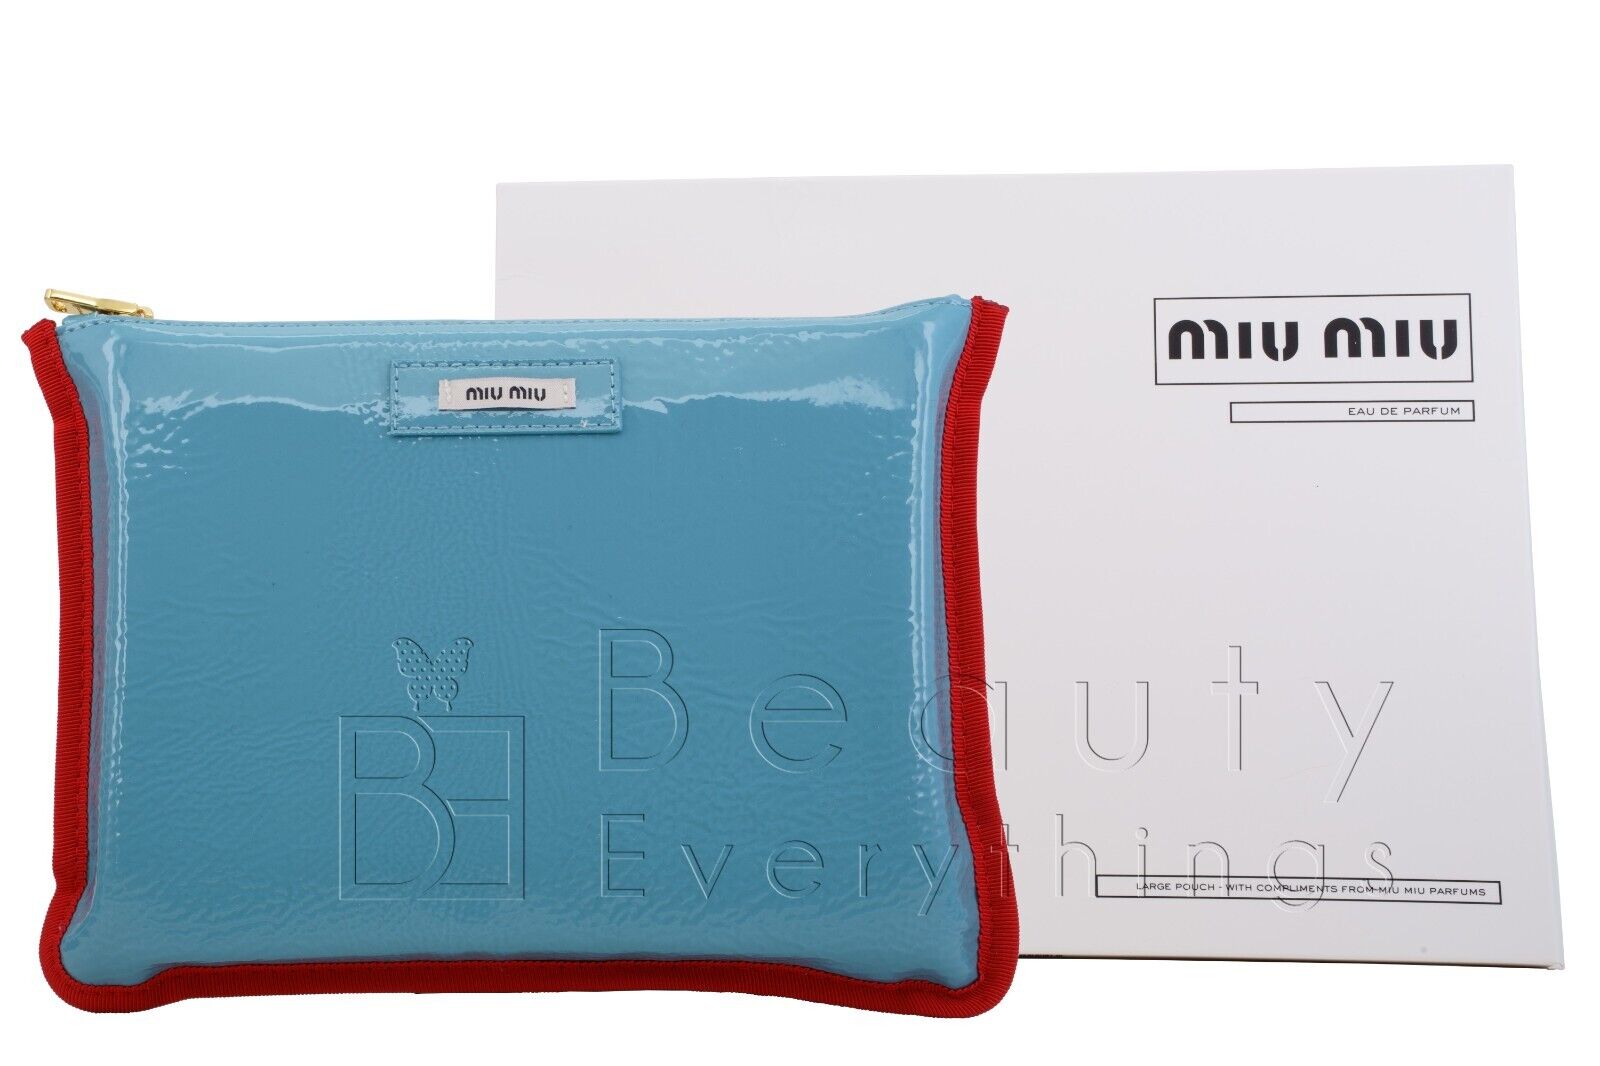 Miu Miu Large Pouch / Bag Brand New In Box For Women